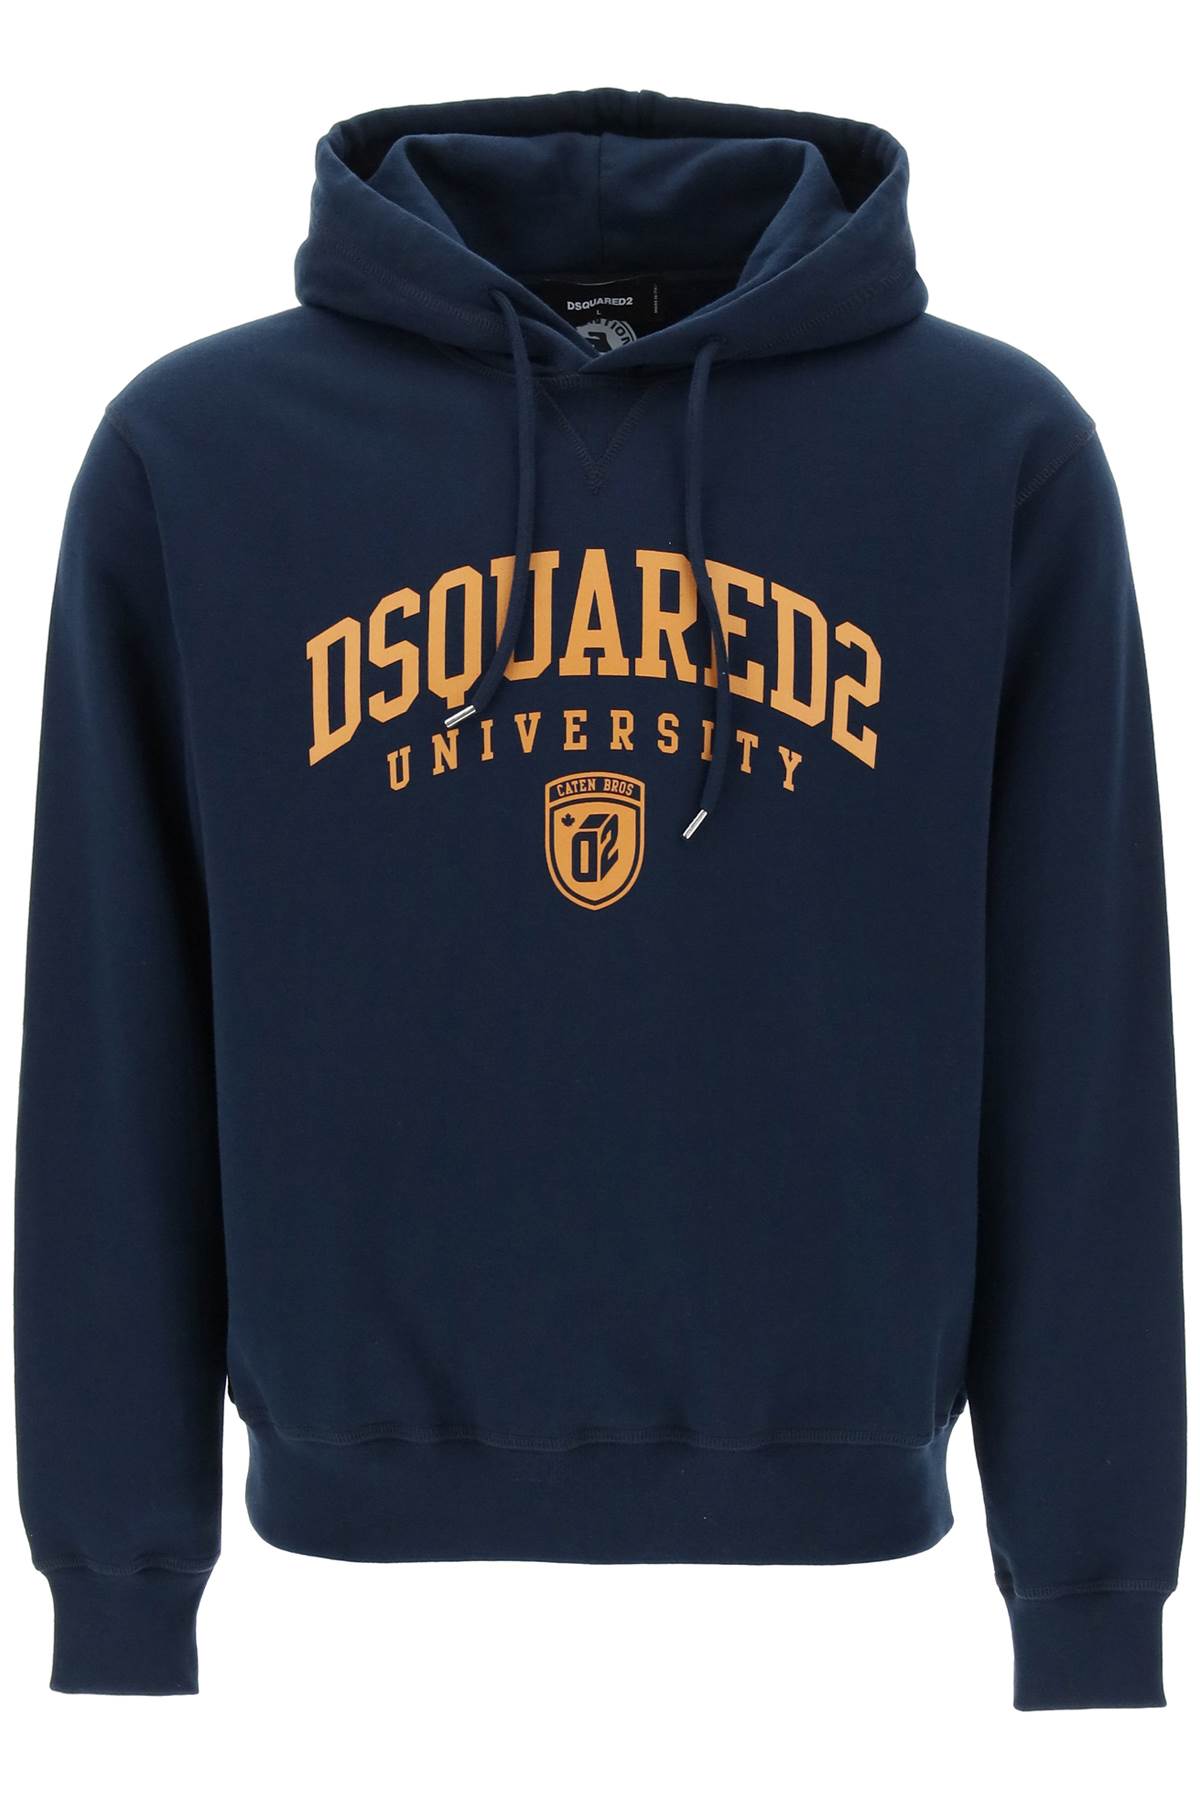 Dsquared2 'university' cool fit hoodie S74GU0744 S25516 NAVY BLUE